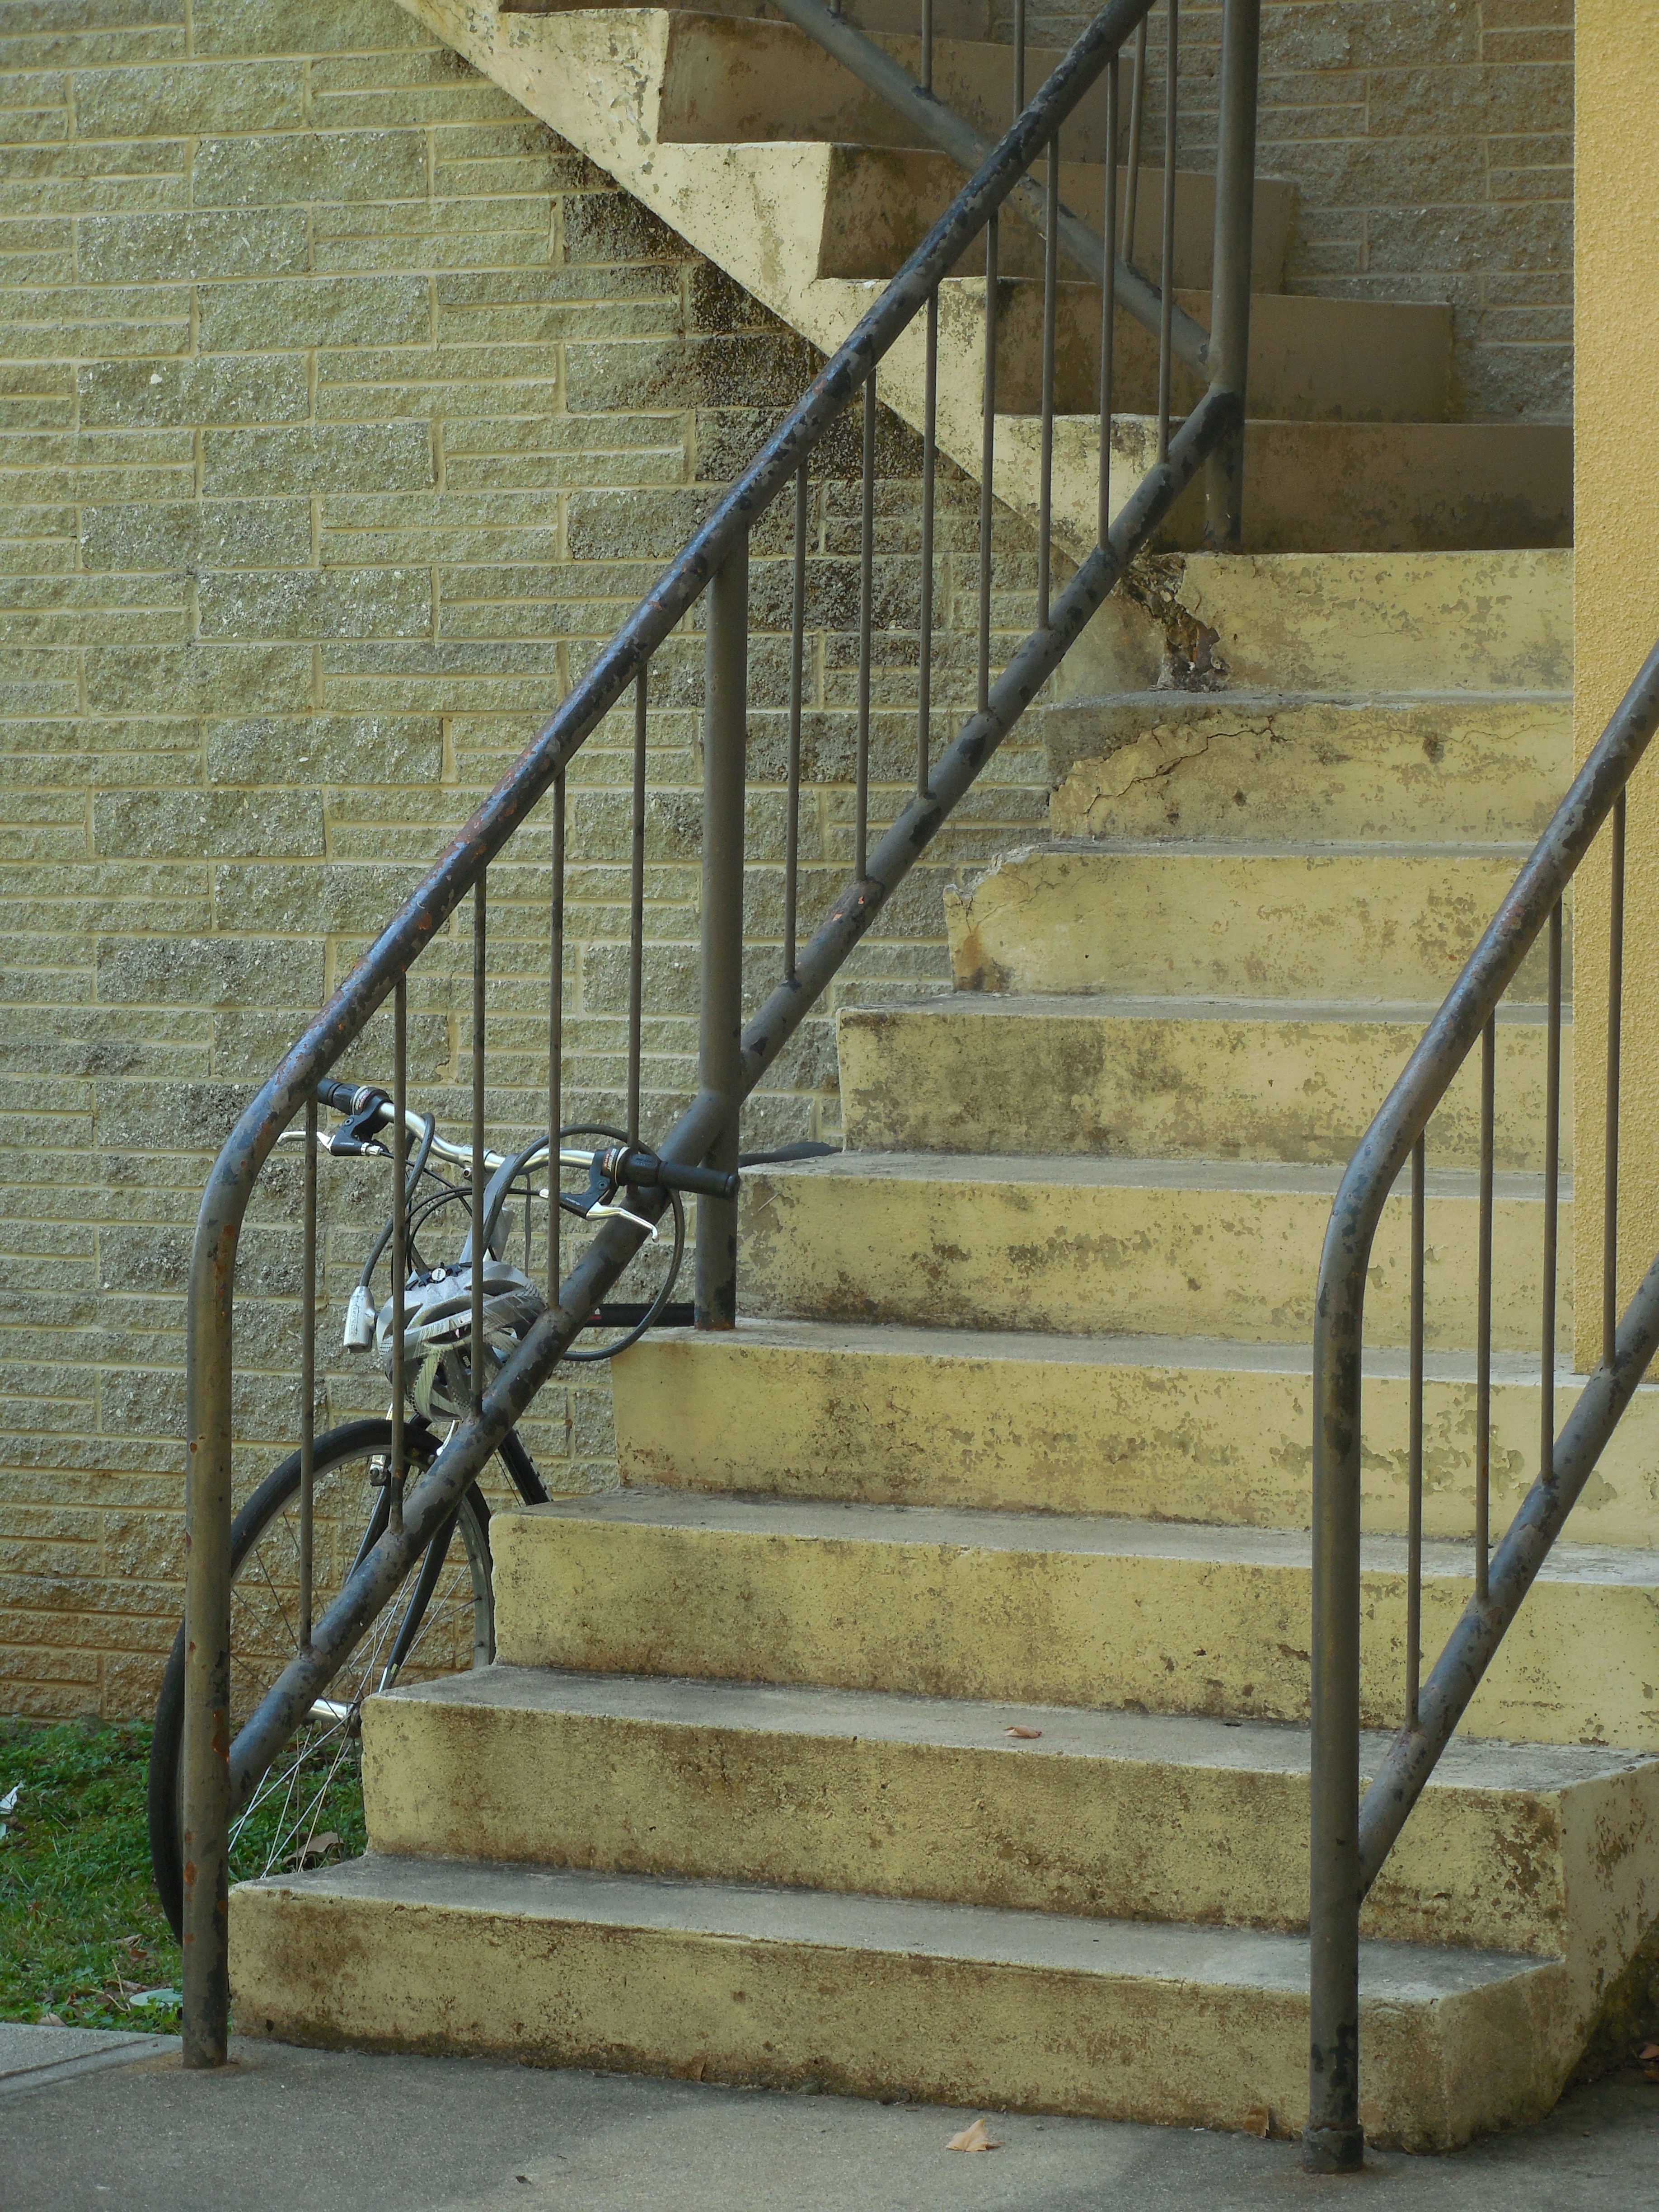 Lifestyle, Bicycle, Stairs, Building, steps, steps and staircases